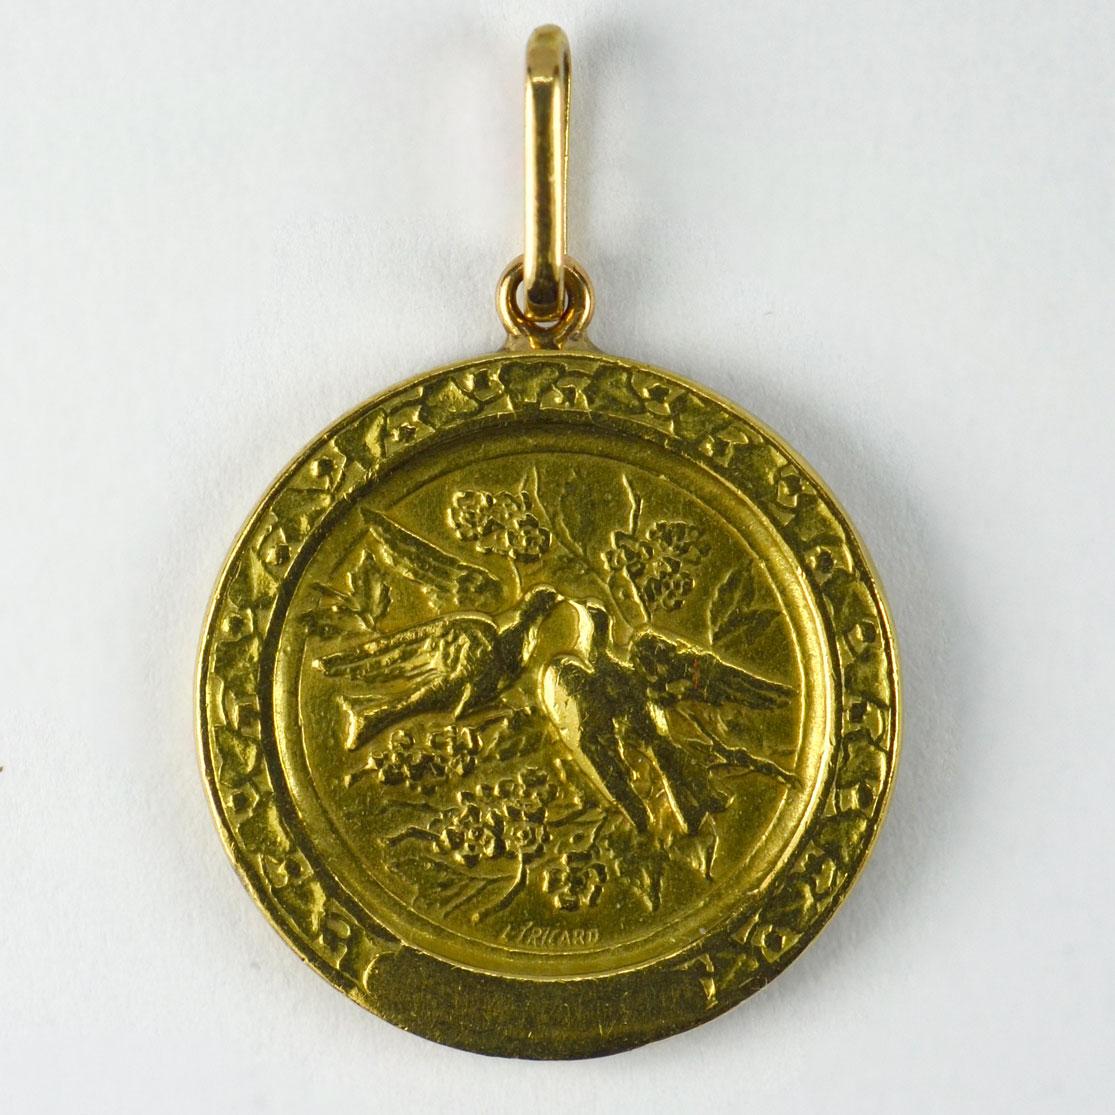 A French 18 karat (18K) yellow gold charm pendant designed as a round medal depicting a thoughtful cupid with bow and arrow to one side, with a pair of lovebirds on a rose branch within a frame of ivy to the reverse. Signed L. Tricard and numbered